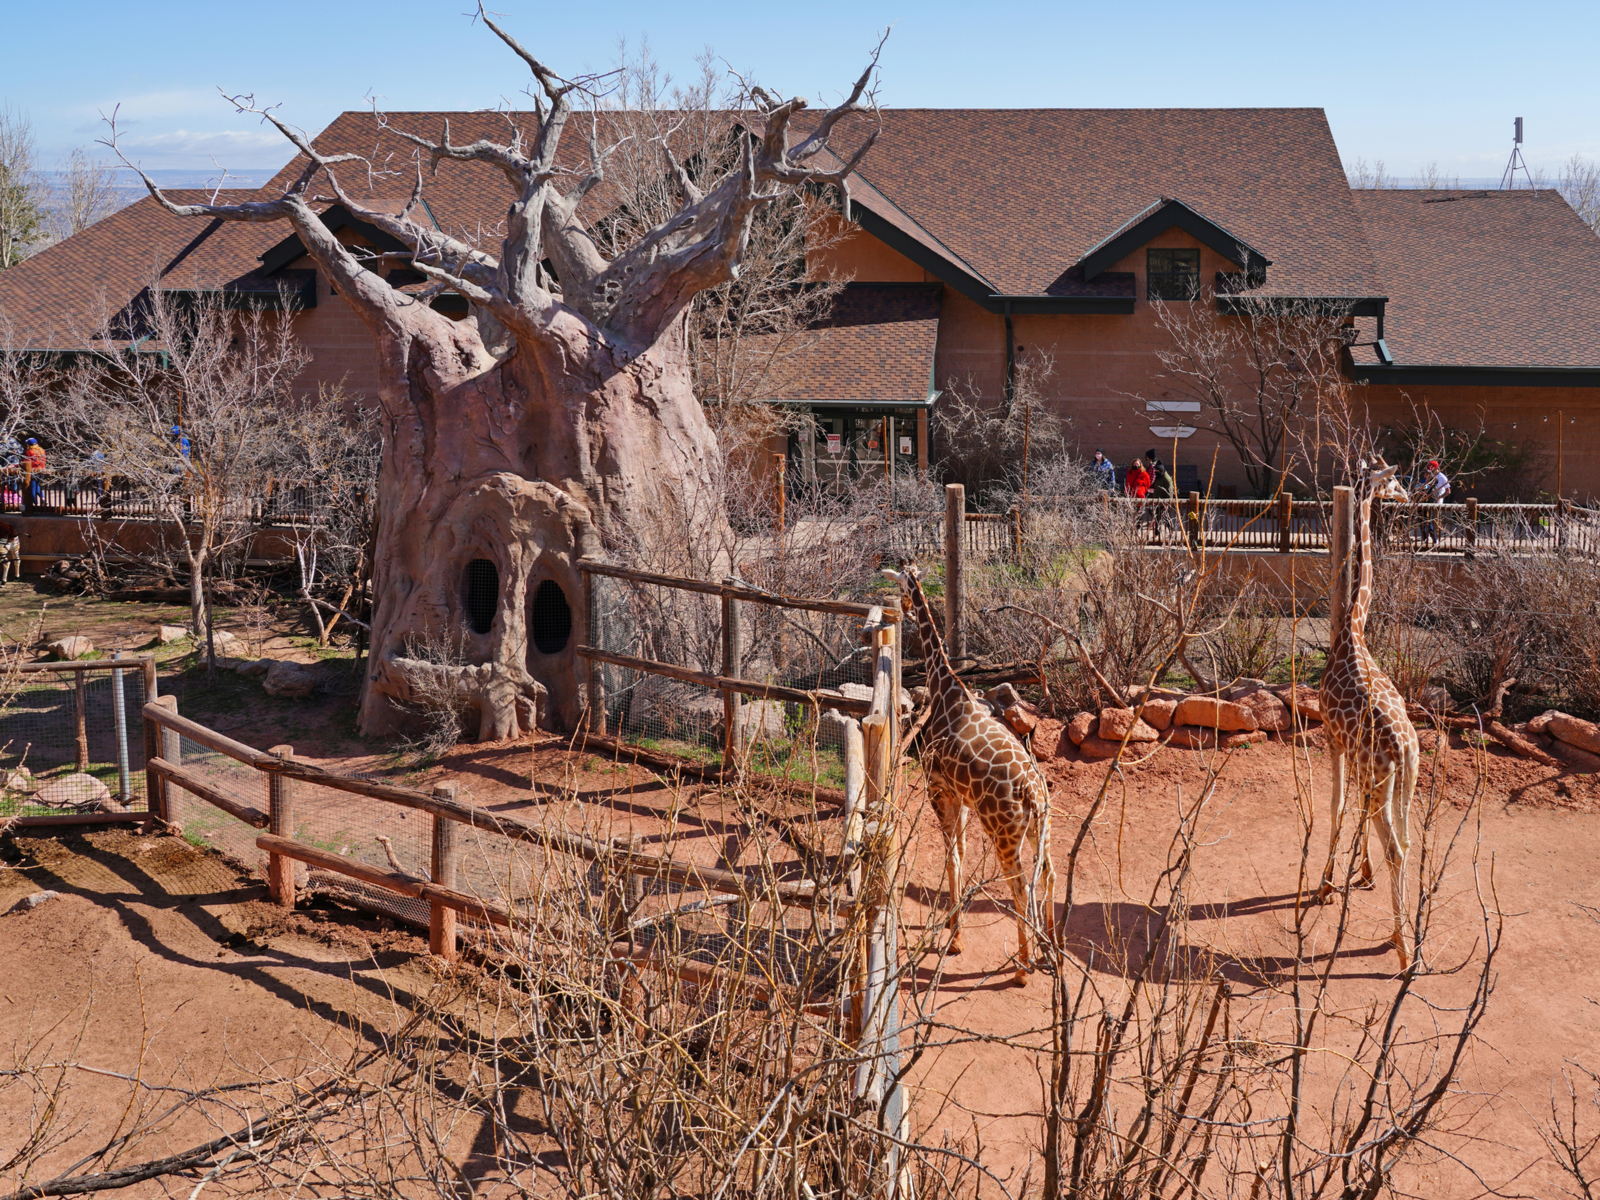 Cheyenne Mountain Zoo, one of the top picks for the best things to do in Colorado